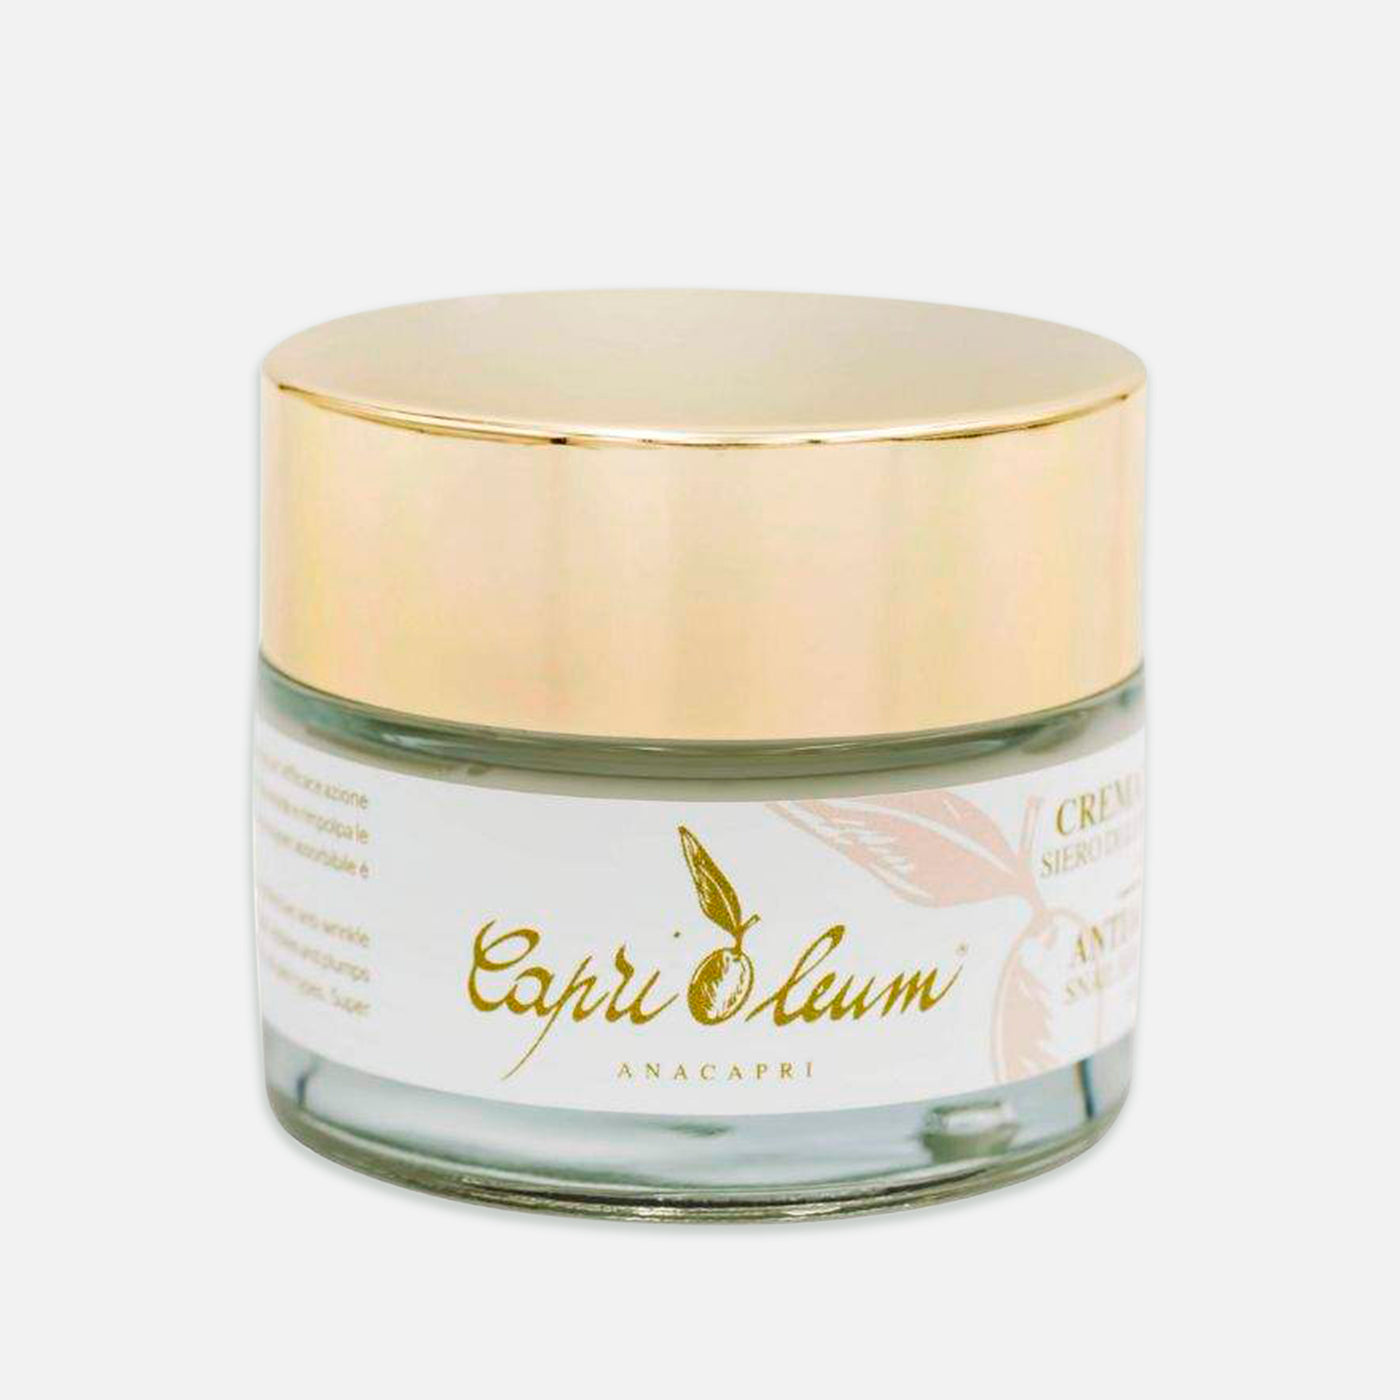 Moisturizing Face Cream with Extra virgin olive oil from Capri